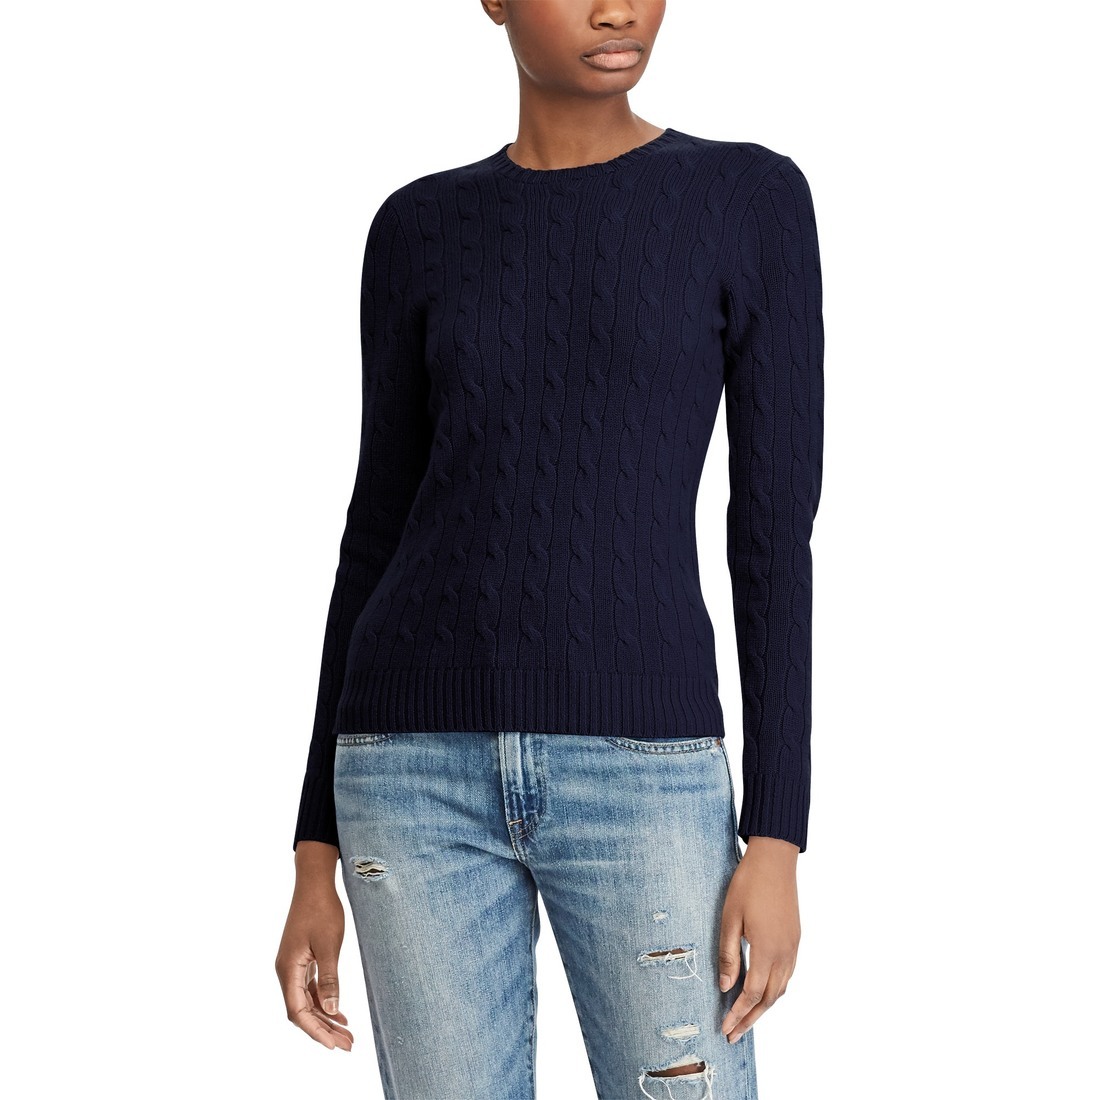 Ladies Crew Neck Cable Knit Sweater